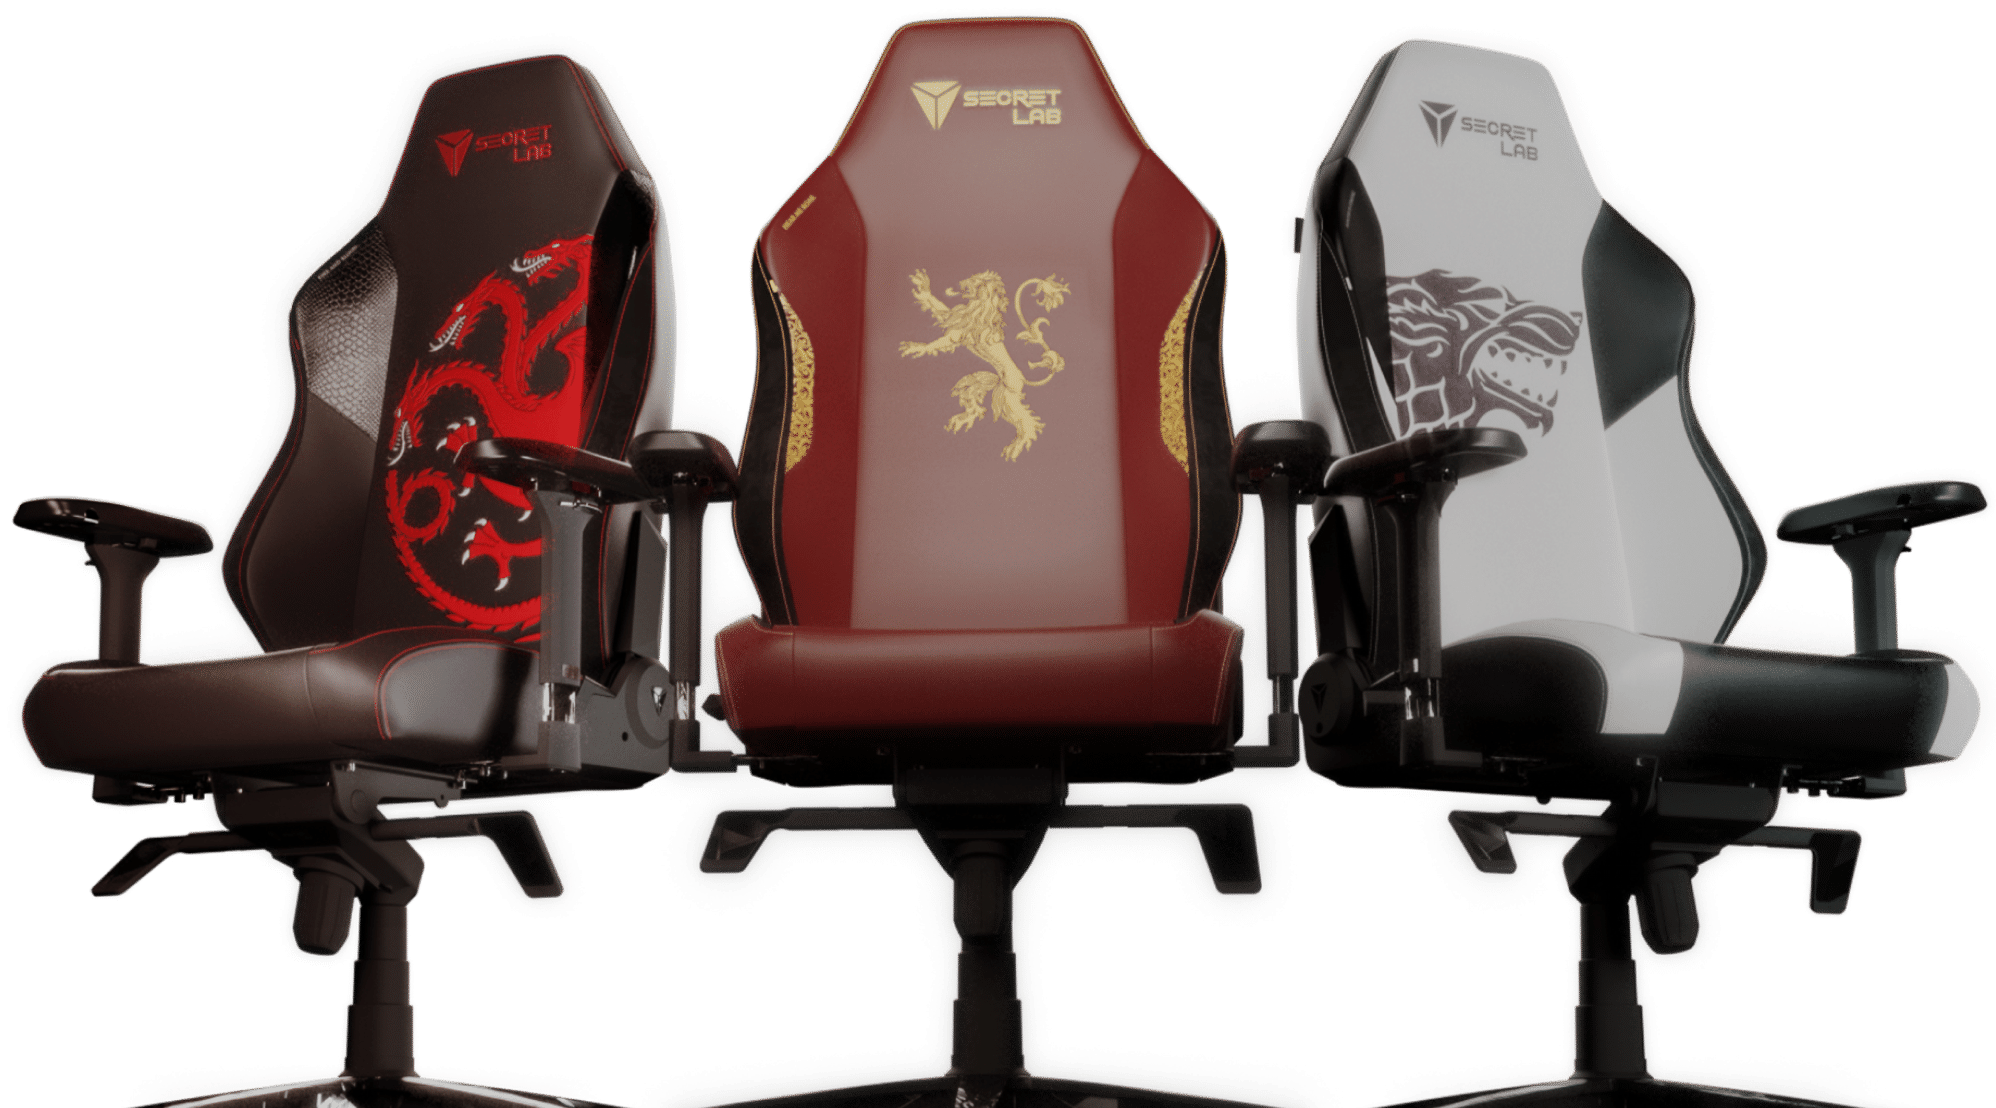 Secretlab x Game of Thrones: Iron Anniversary Edition Gaming Chairs